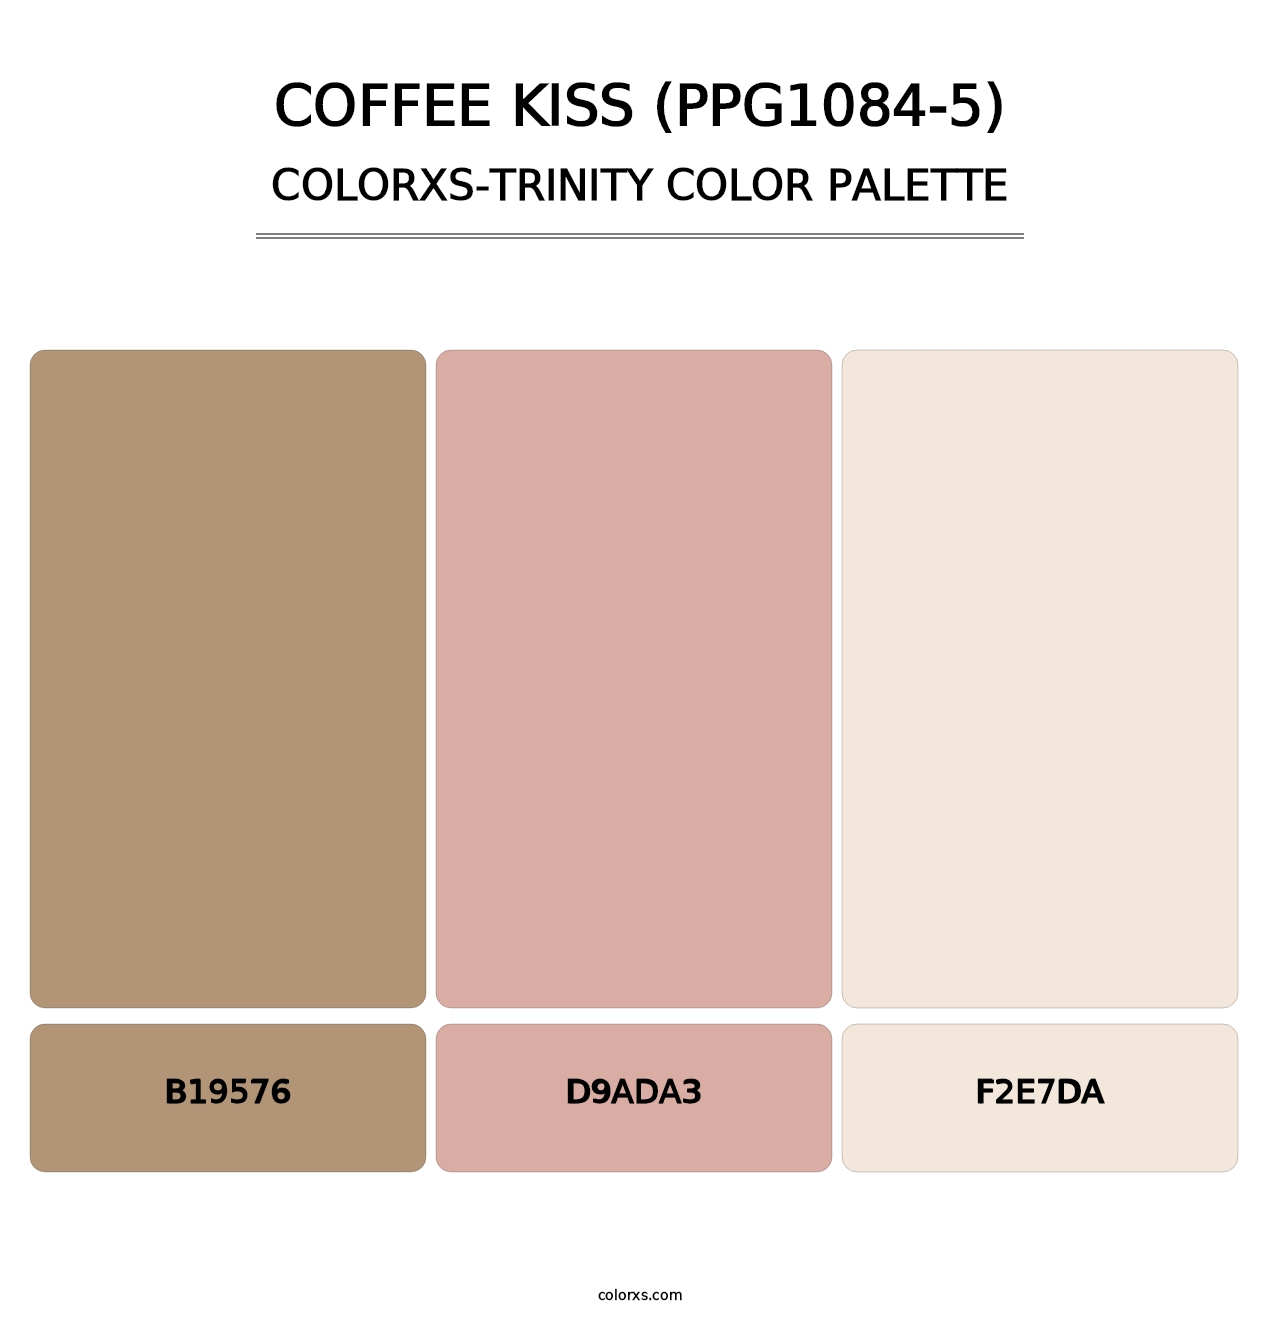 Coffee Kiss (PPG1084-5) - Colorxs Trinity Palette